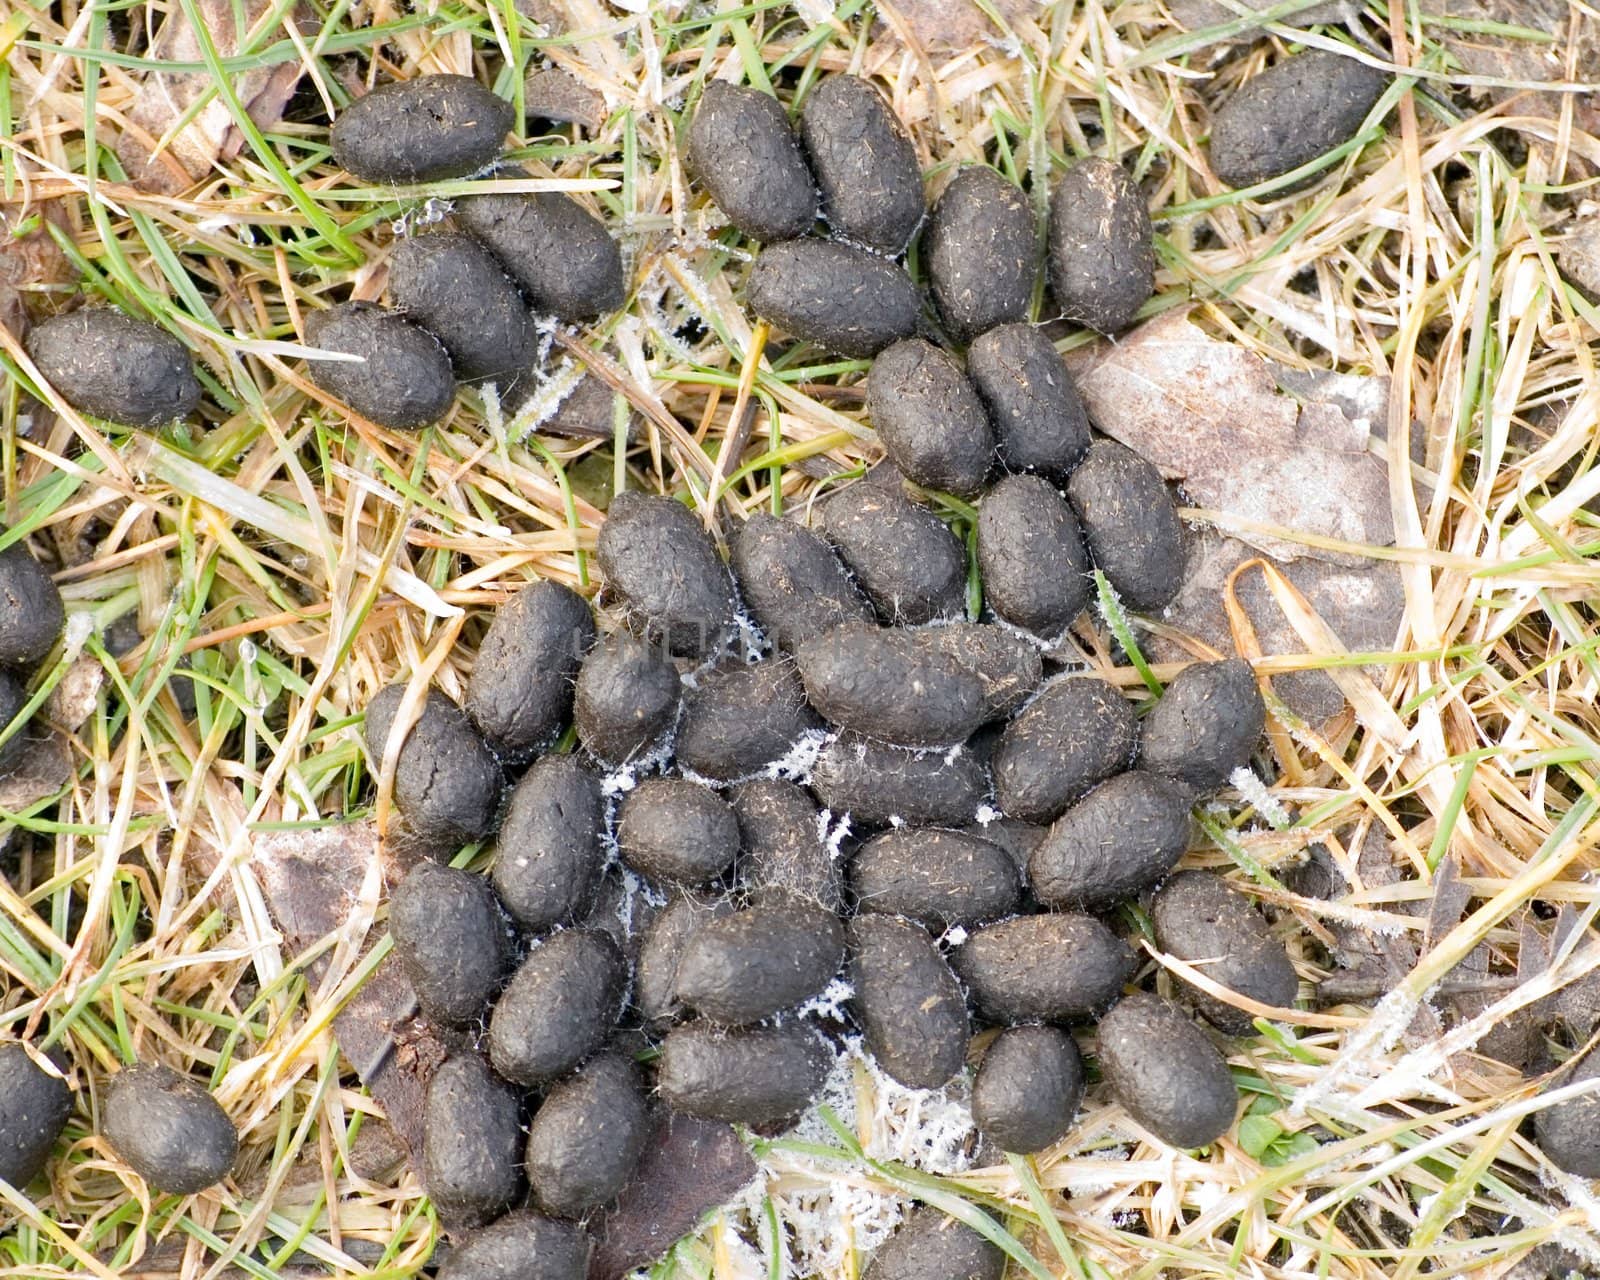 Whitetail deer droppings in the grass.